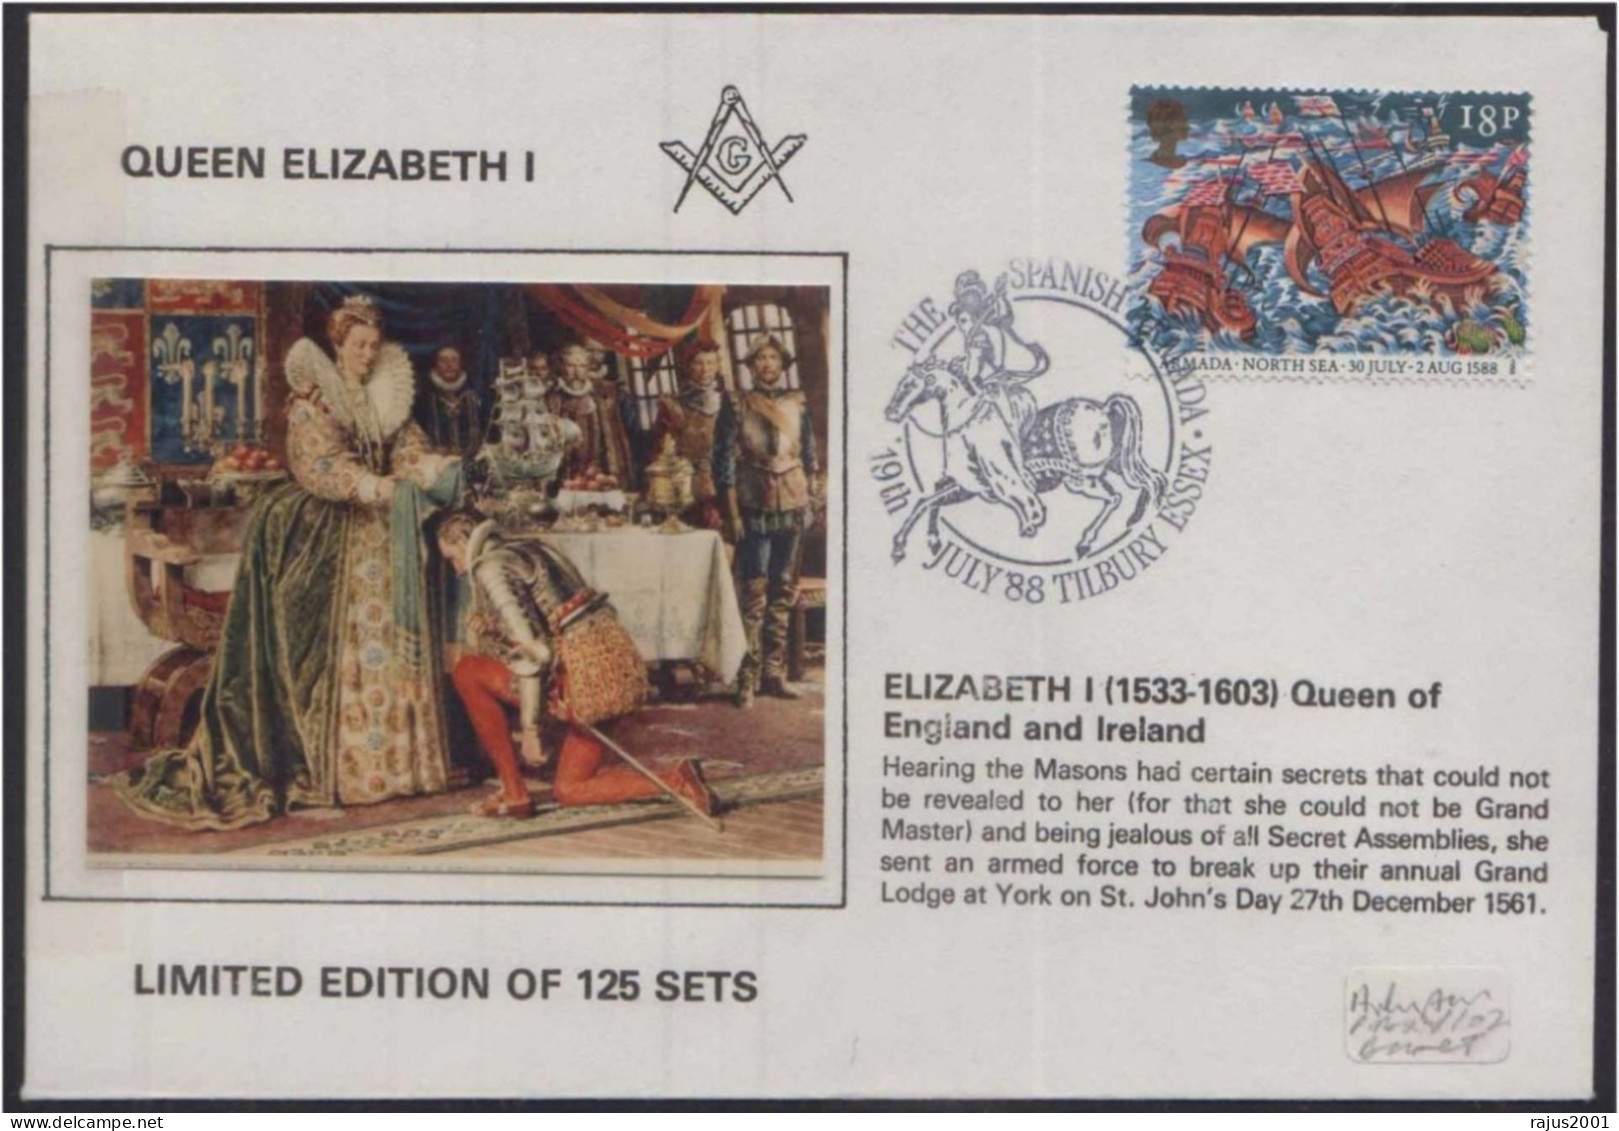 Queen Elizabeth I Sent Armed Forces To Break Masonic Meeting At Grand Lodge At York Freemasonry Limited Edition Cover - Franc-Maçonnerie